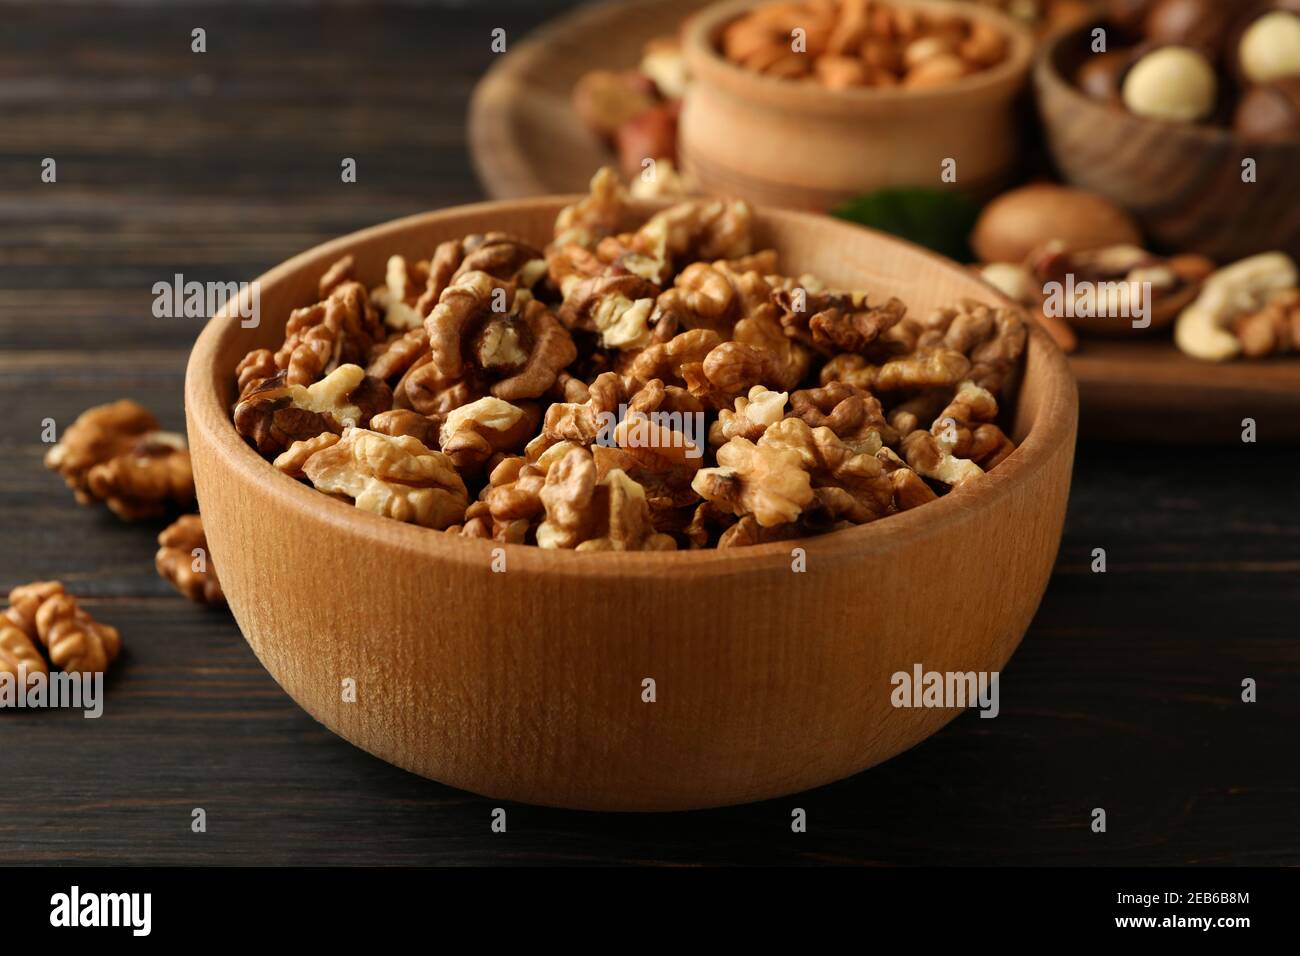 Wooden bowl with walnuts on wood background, close up Stock Photo